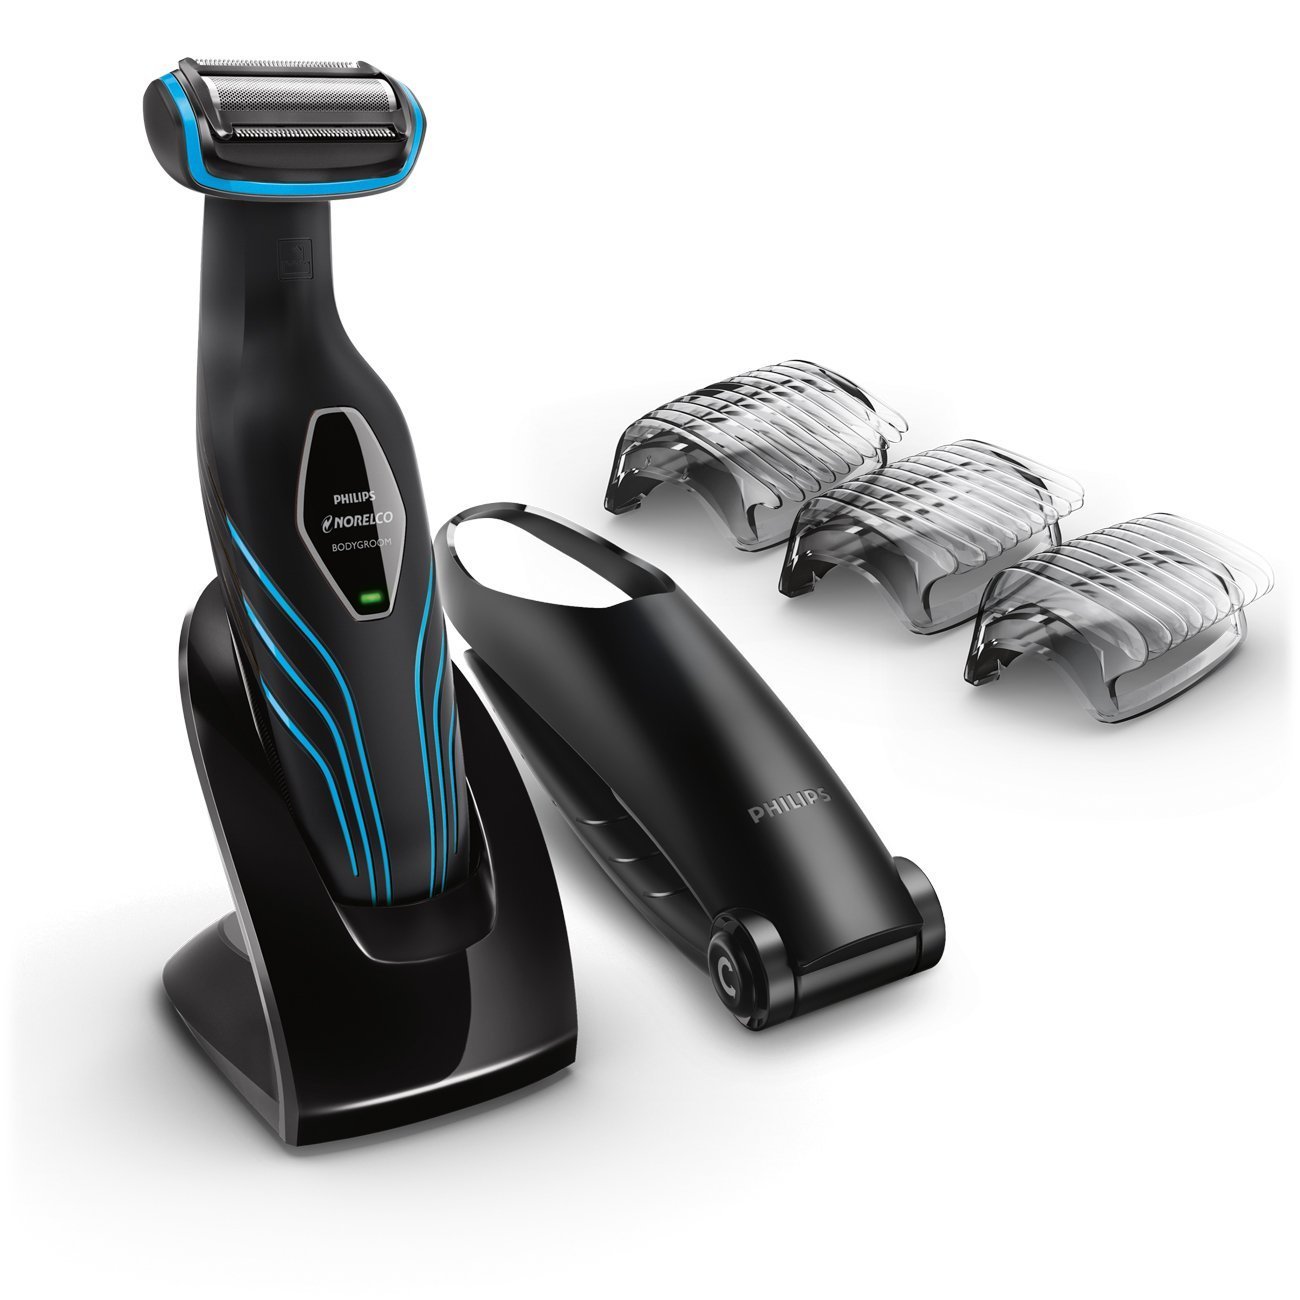 Today only: Philips Norelco Bodygroom series 3100 for $26, free shipping